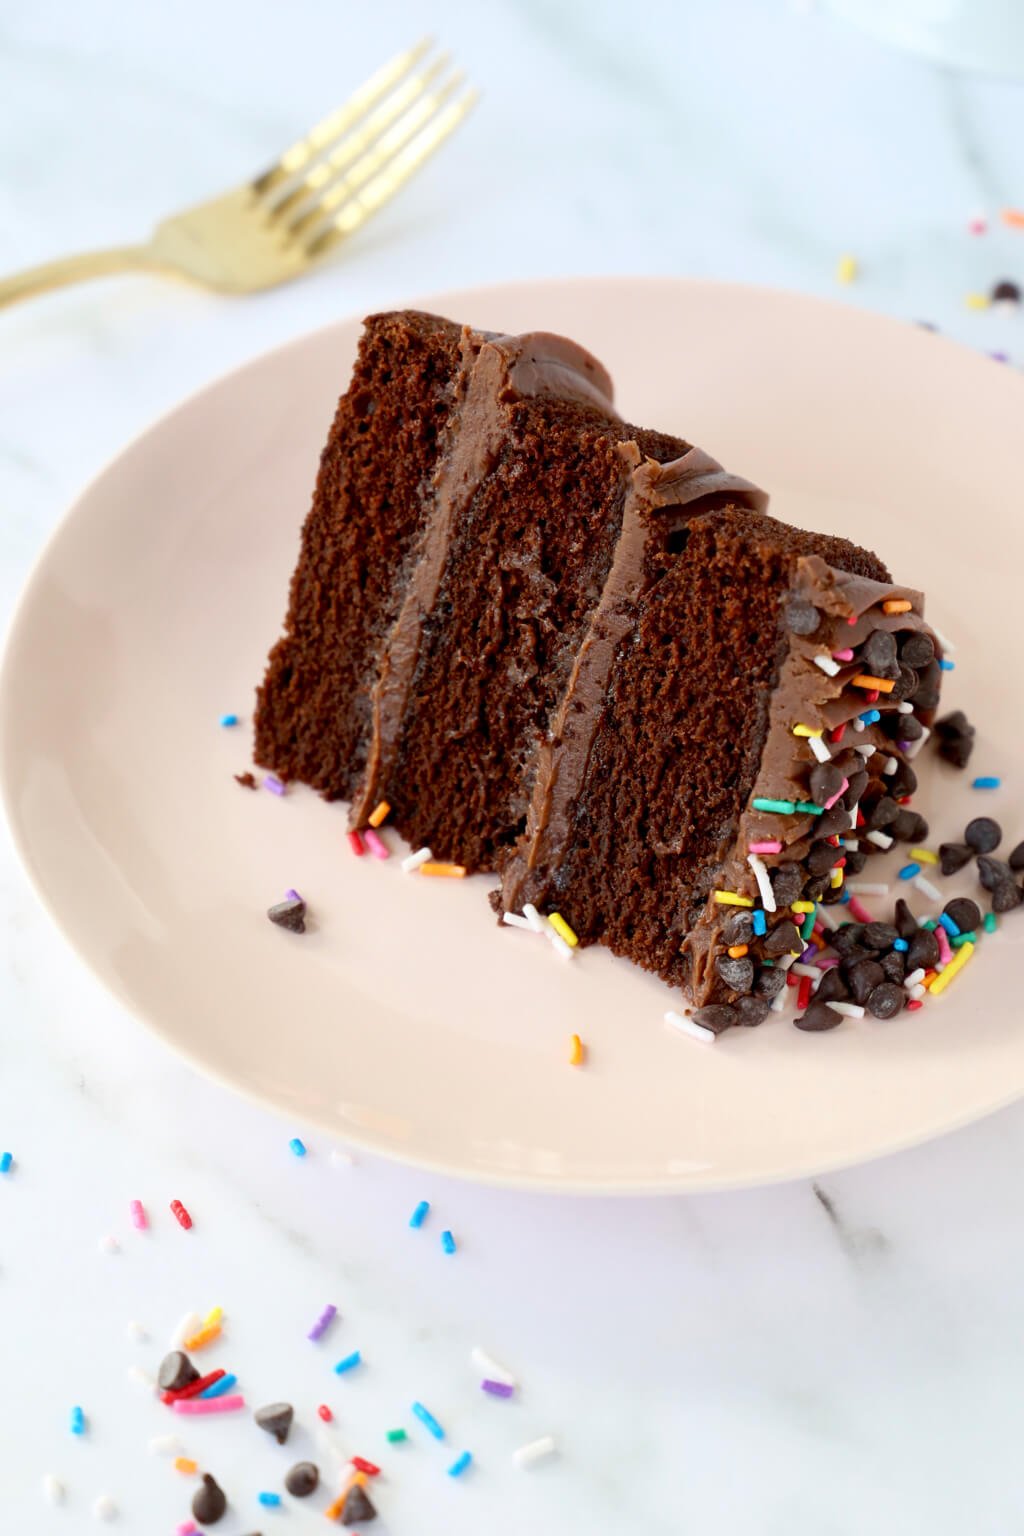 A slice of classic chocolate layer cake on a plate with a fork